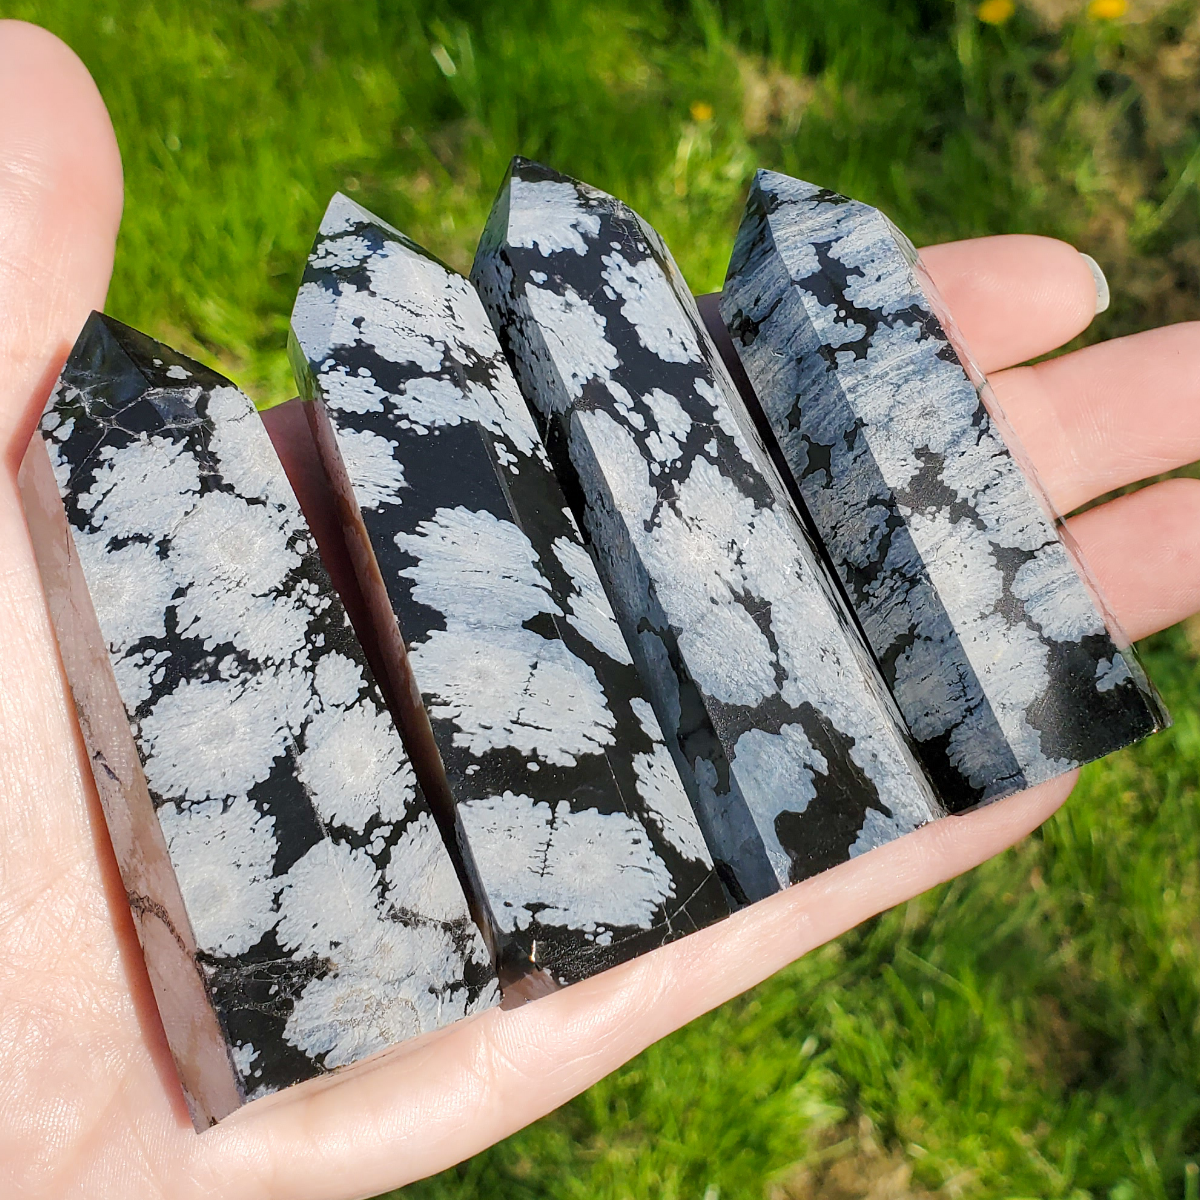 Ethically mined Snowflake Obsidian points